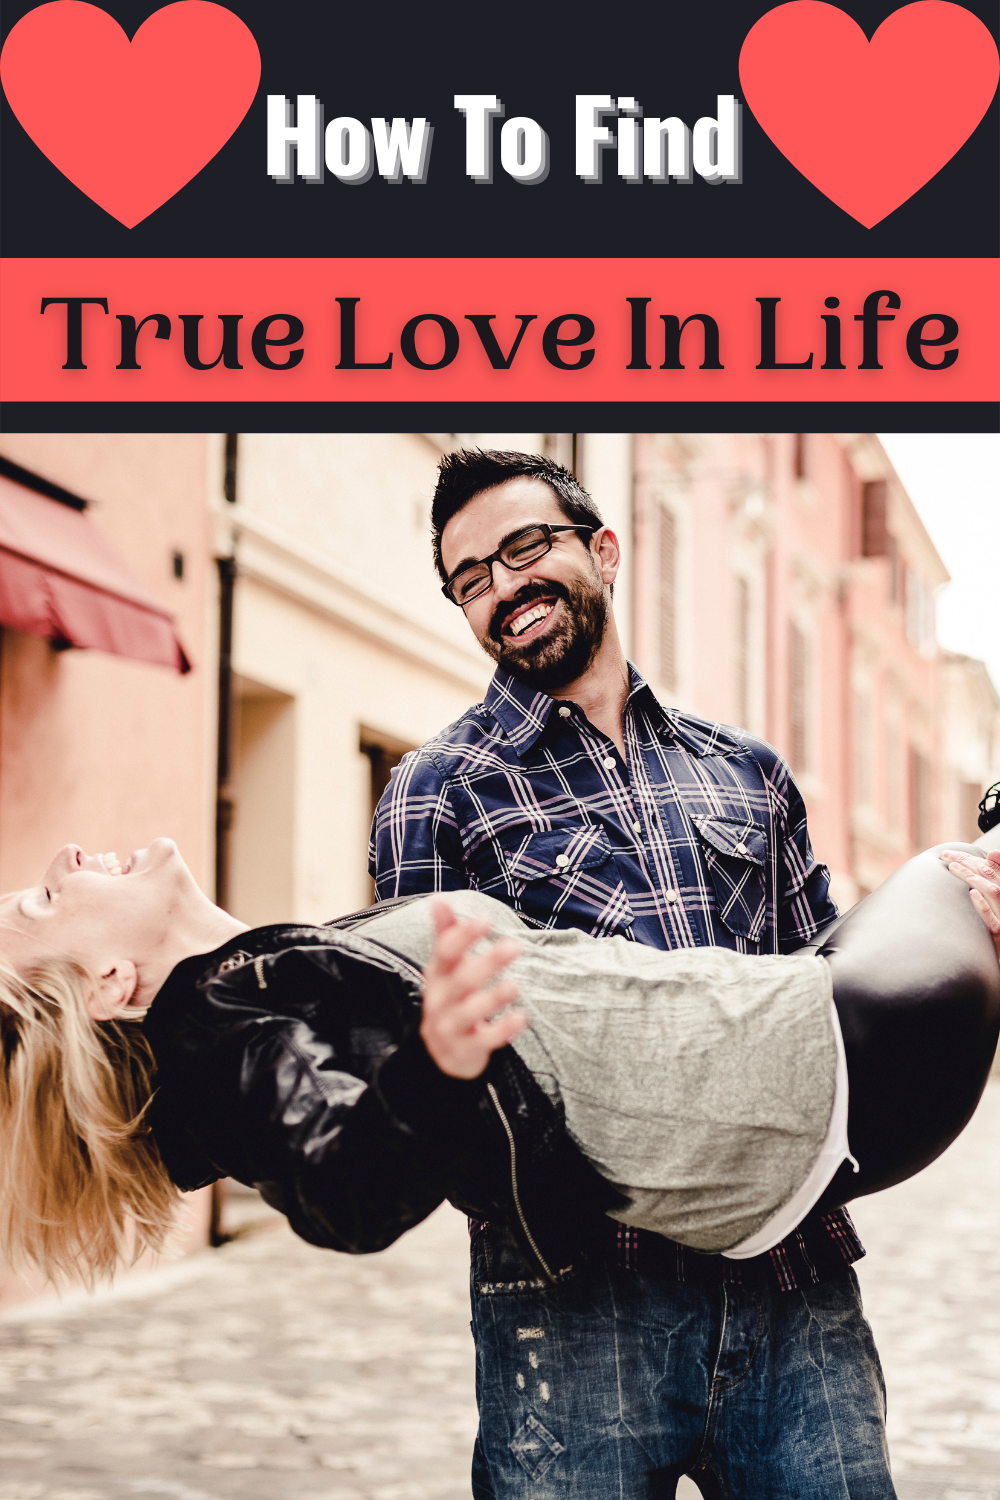 How to find true love and happiness